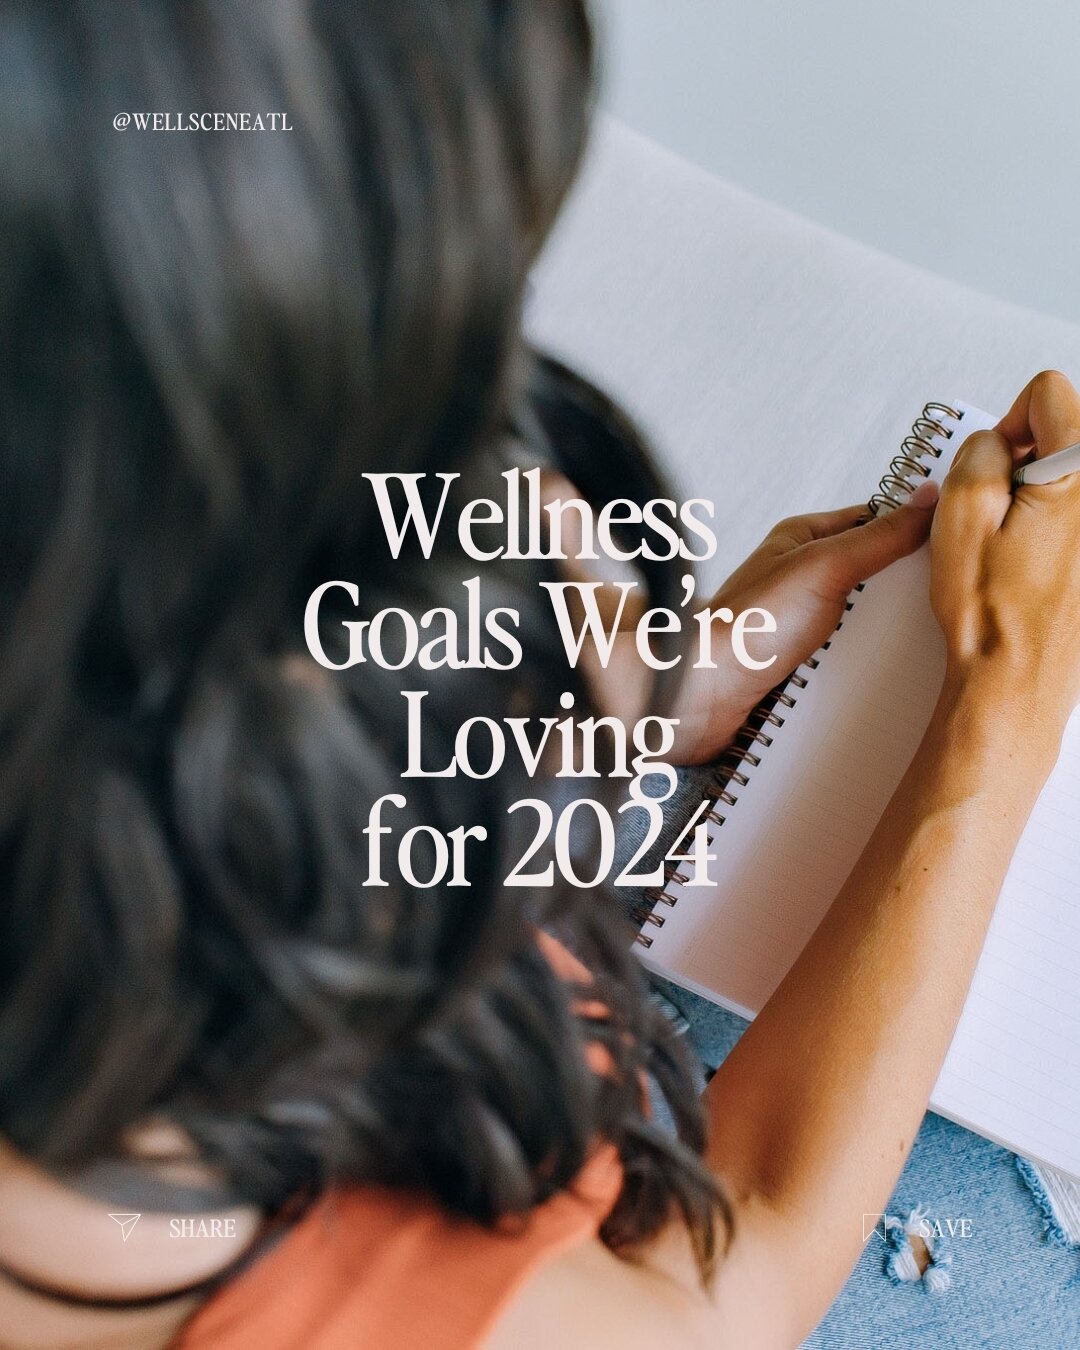 While specific health goals are fantastic, let's not overlook the magic in the small changes. 🌟 It's often these subtle shifts in our daily routines that lead to lasting well-being. Embrace the power of tiny transformations along your wellness journ